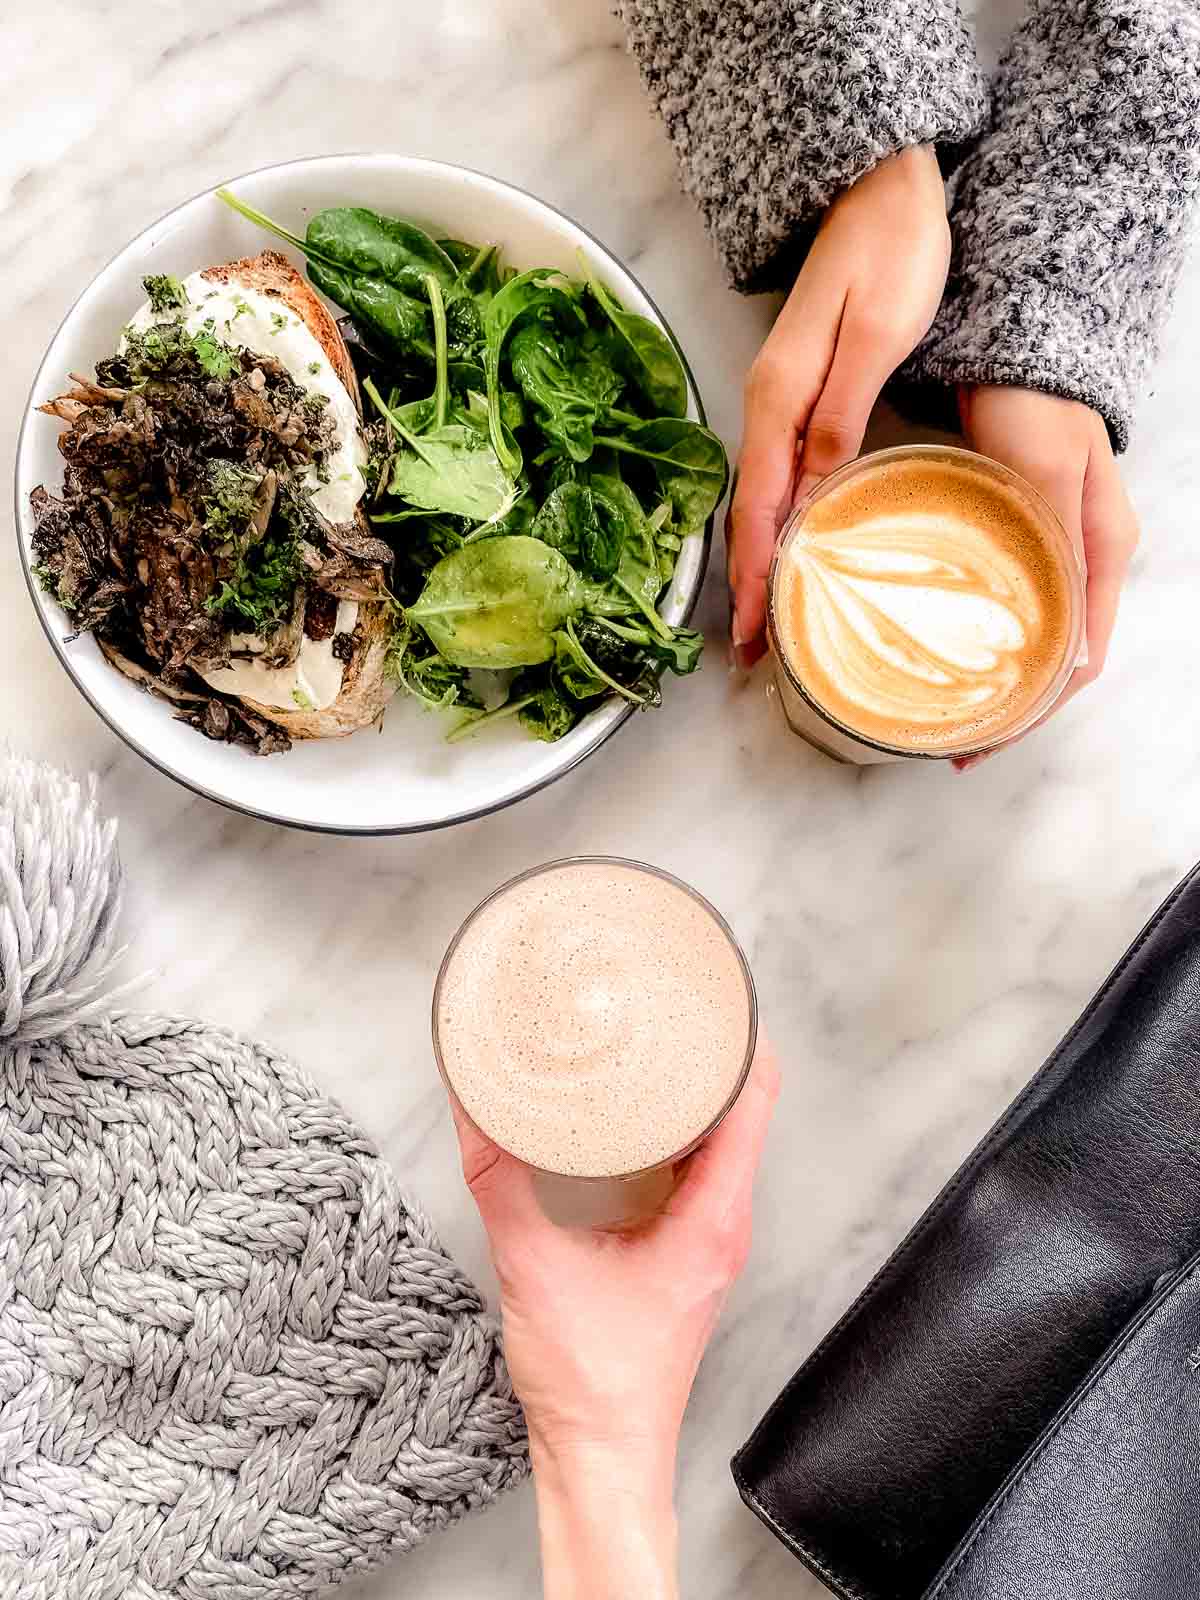 25 Best Vegan Restaurants in Vancouver BC for 2023 - mushroom ricotta toast and hands holding lattes from TurF